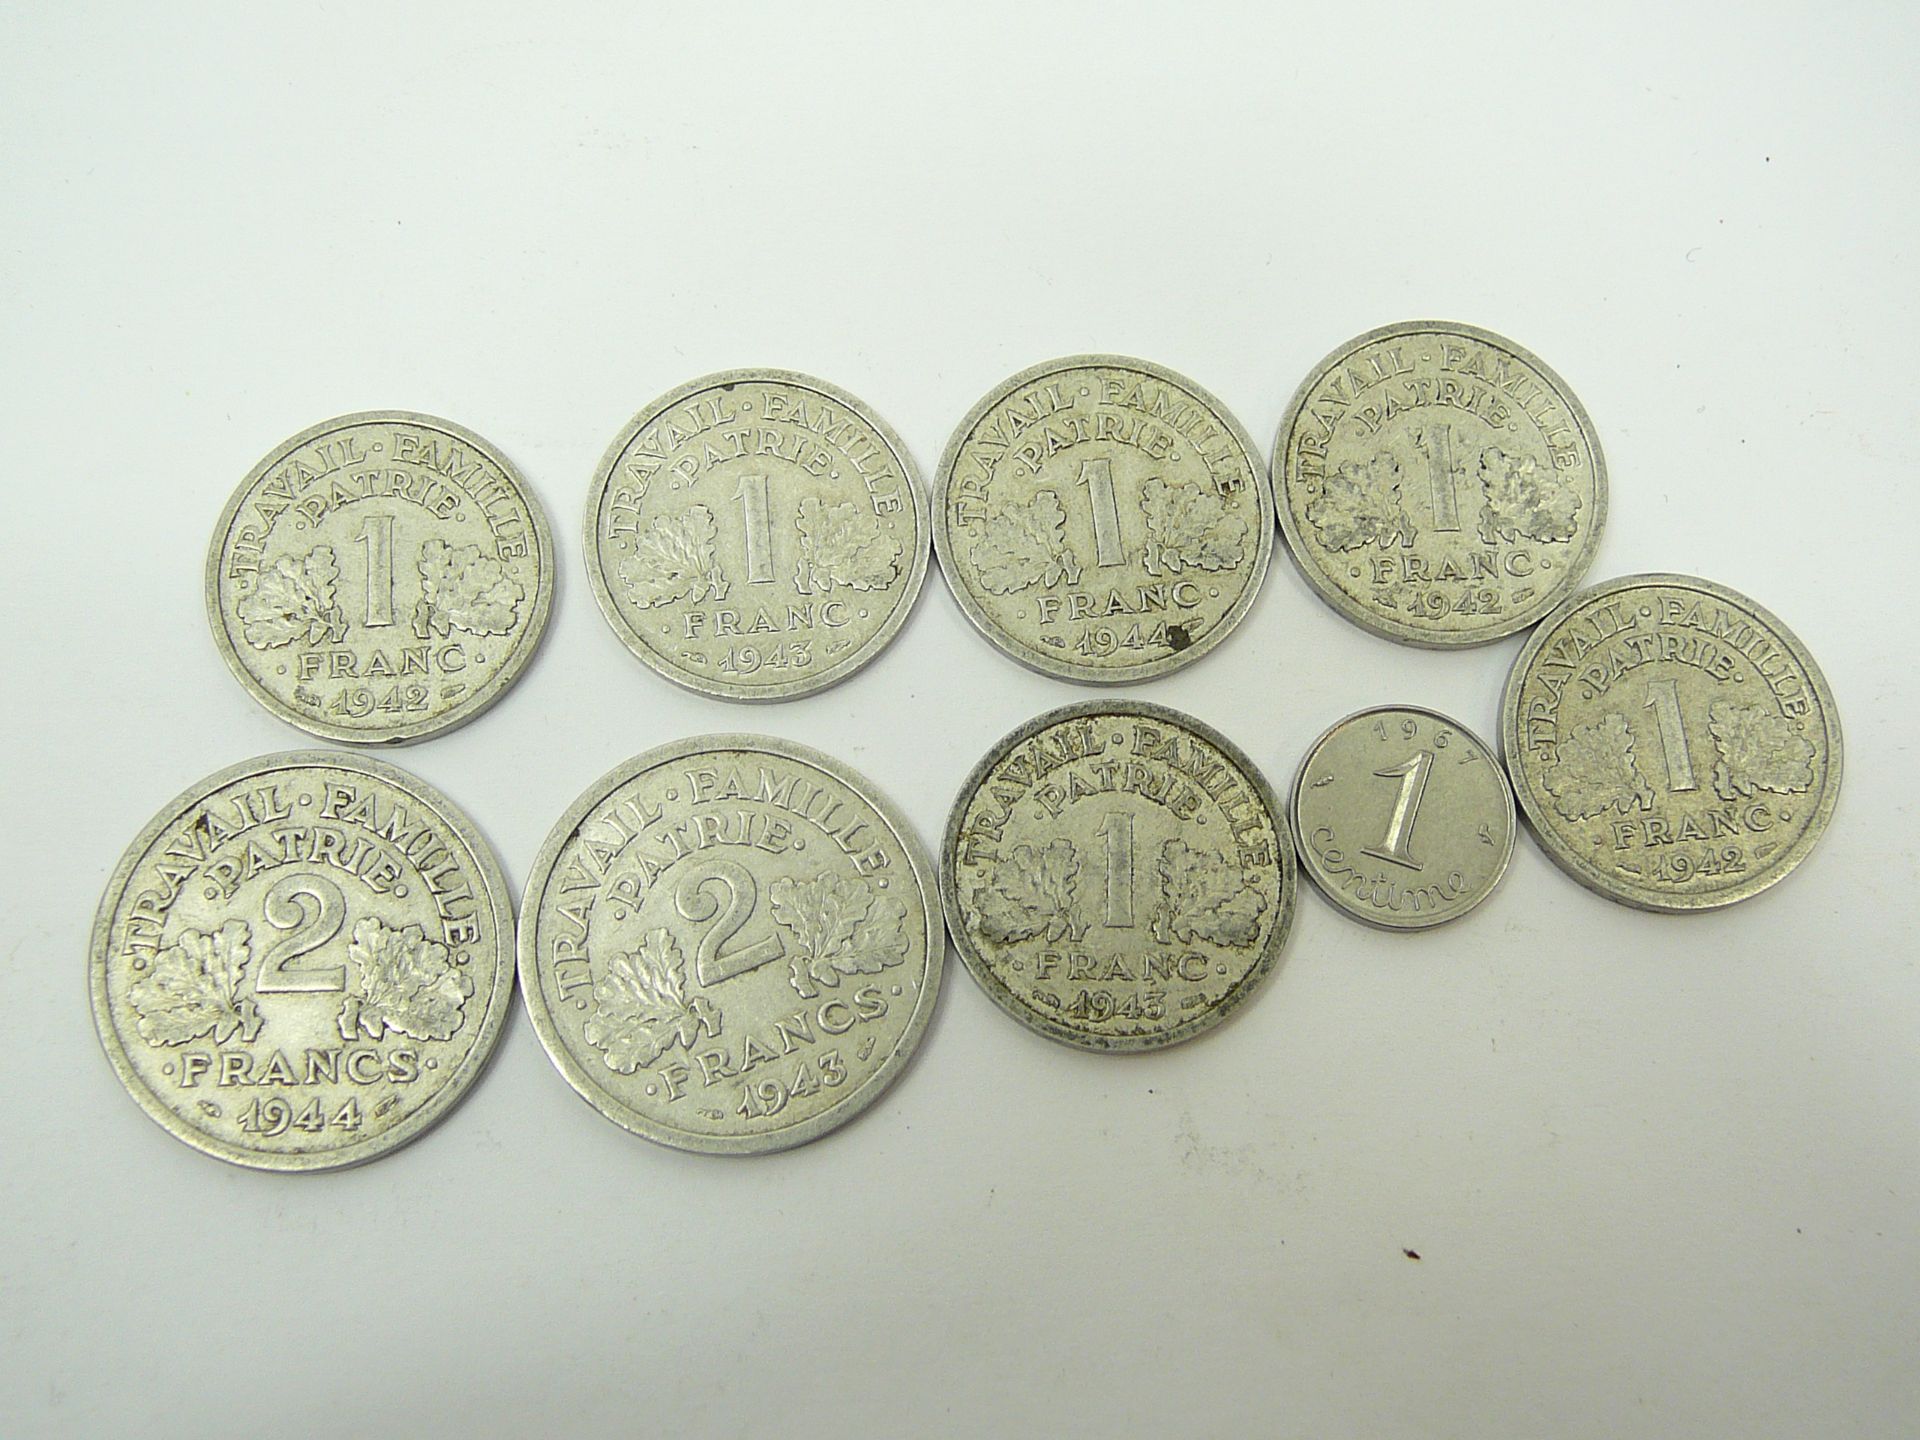 Assd WW2 Occupied France coinage - Image 2 of 2